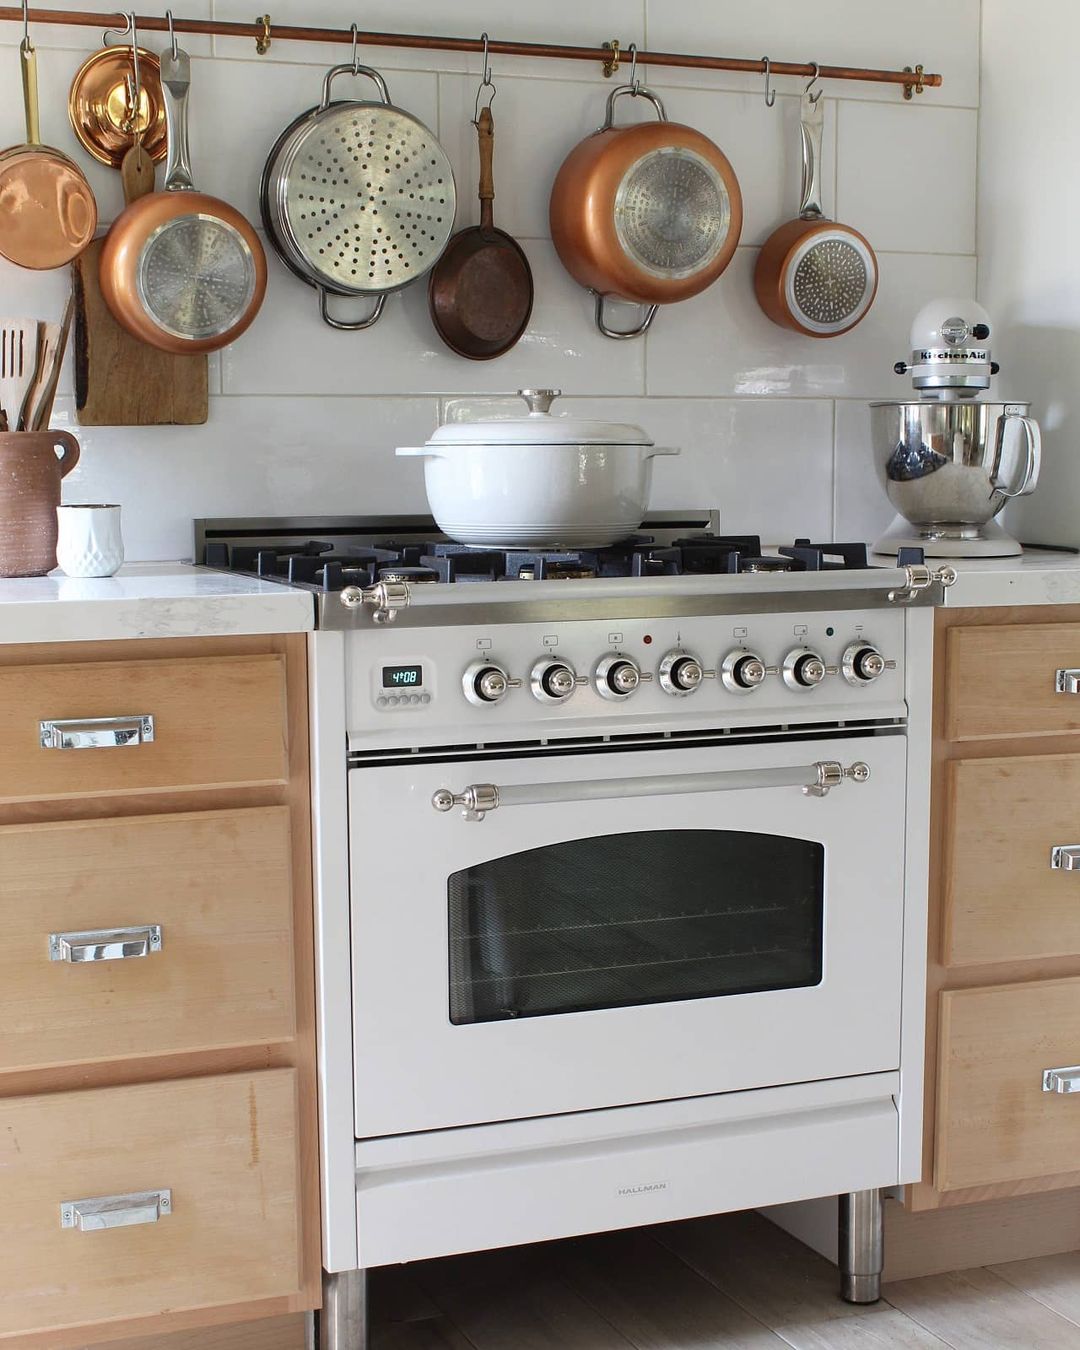 Stovetop with white pot and other pans hung on backsplash. Photo by Instagram user @thevintagebucket